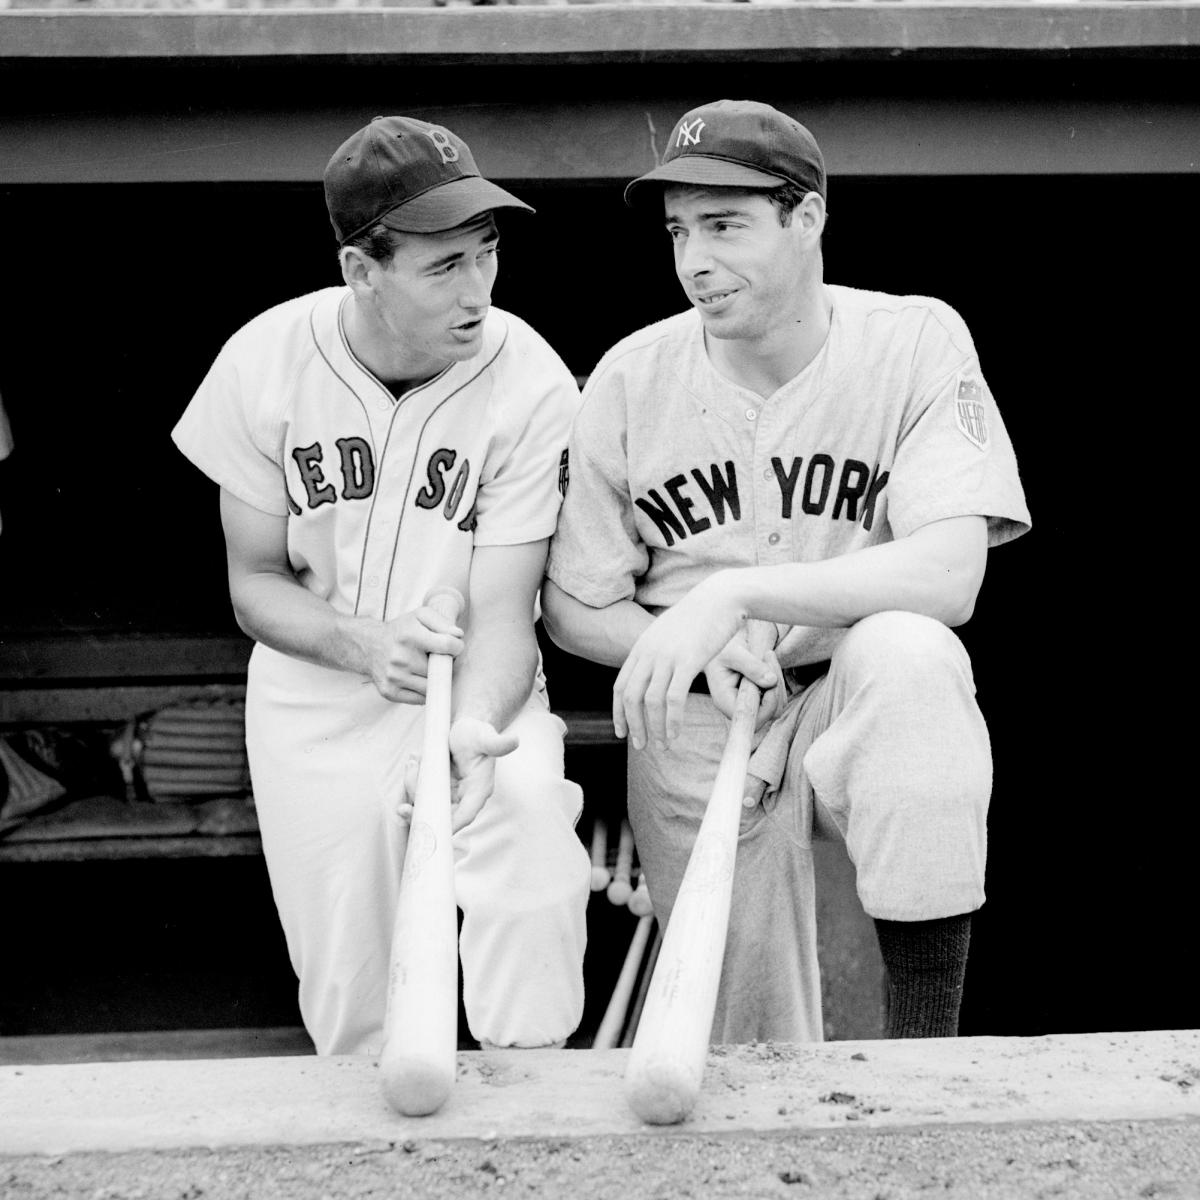 Irreverent fun with old rivals. Red Sox and Yankees, 1924